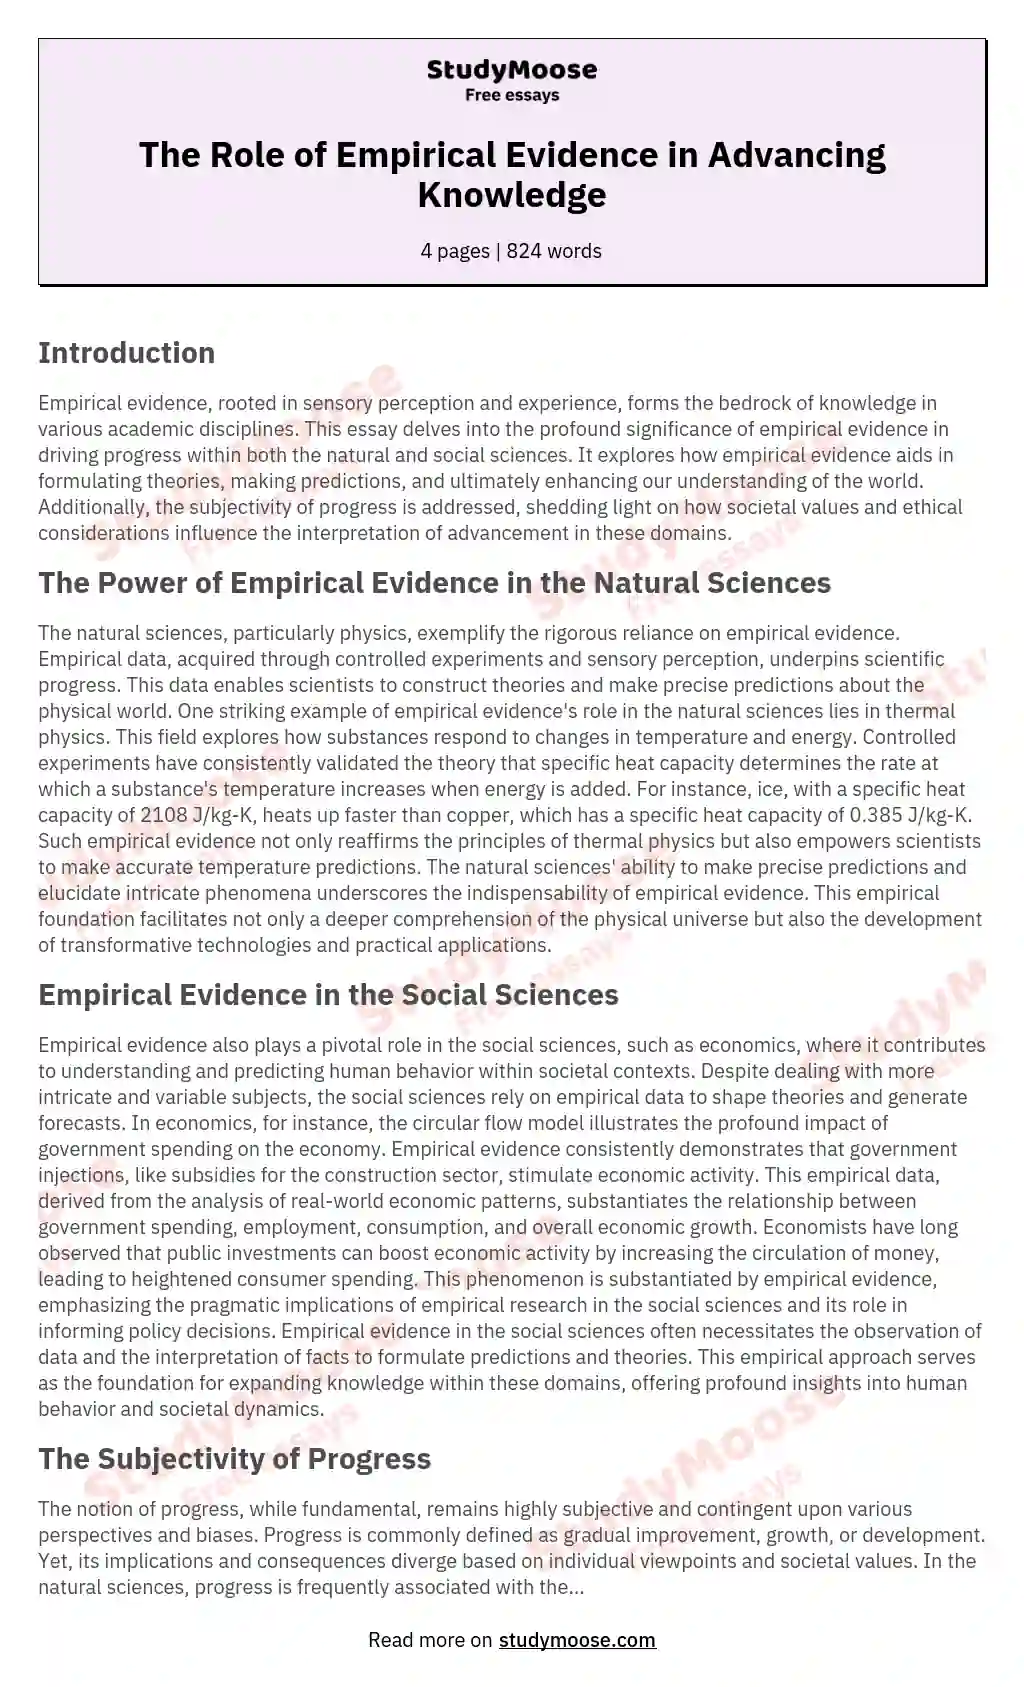 The Role of Empirical Evidence in Advancing Knowledge essay